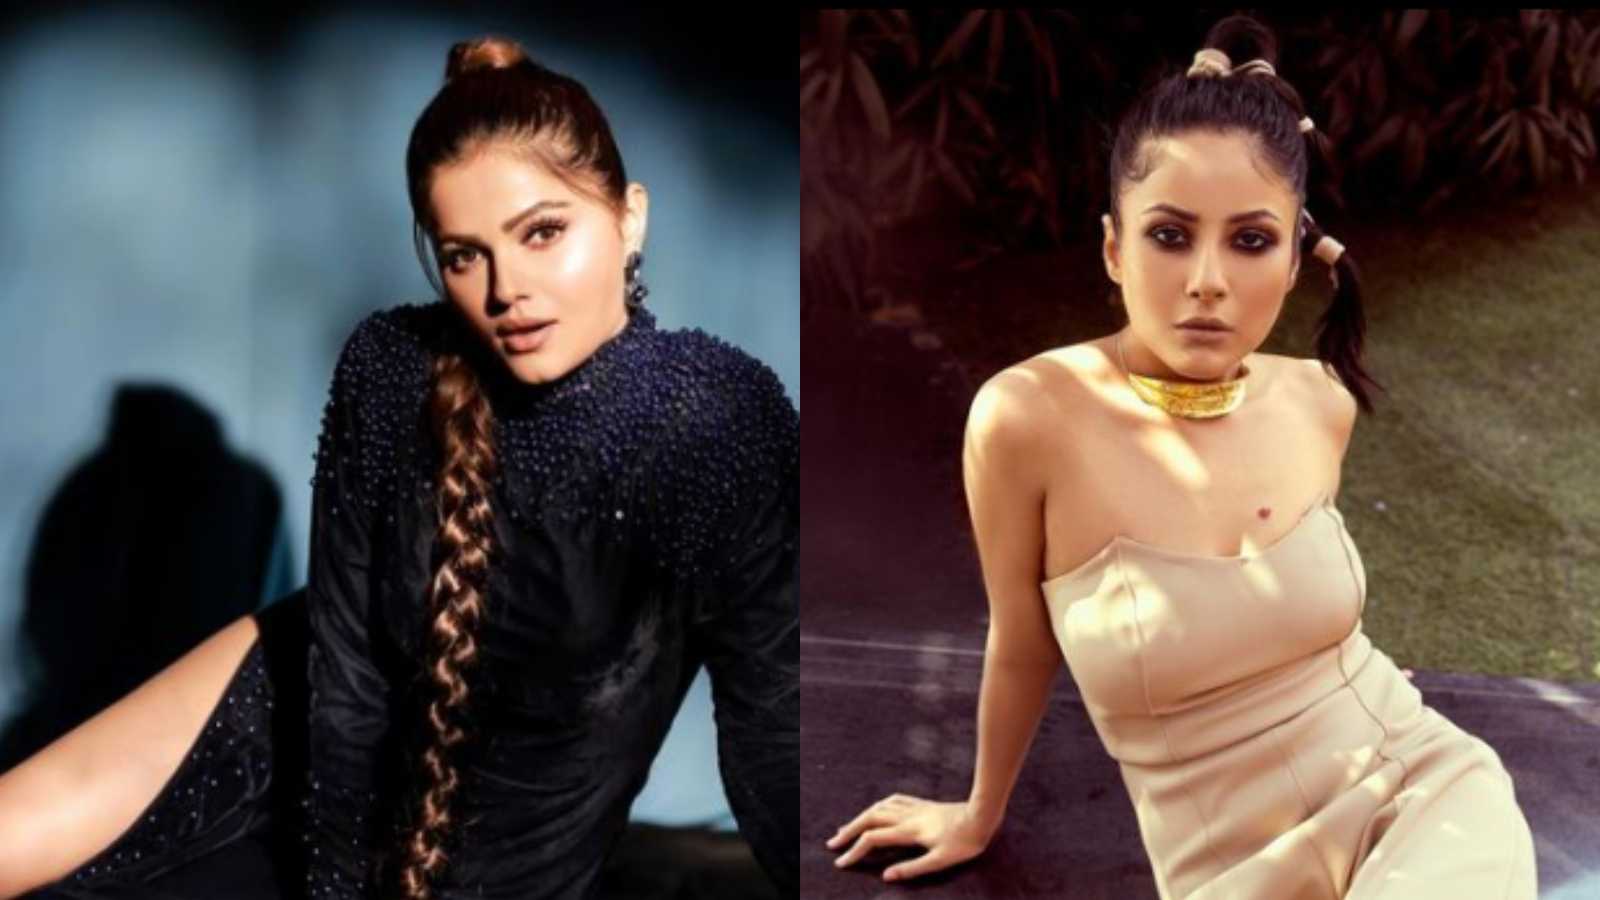 From Shehnaaz Gill to Rubina Dilaik, Bigg Boss divas who made heads turn with their sartorial choices on the show